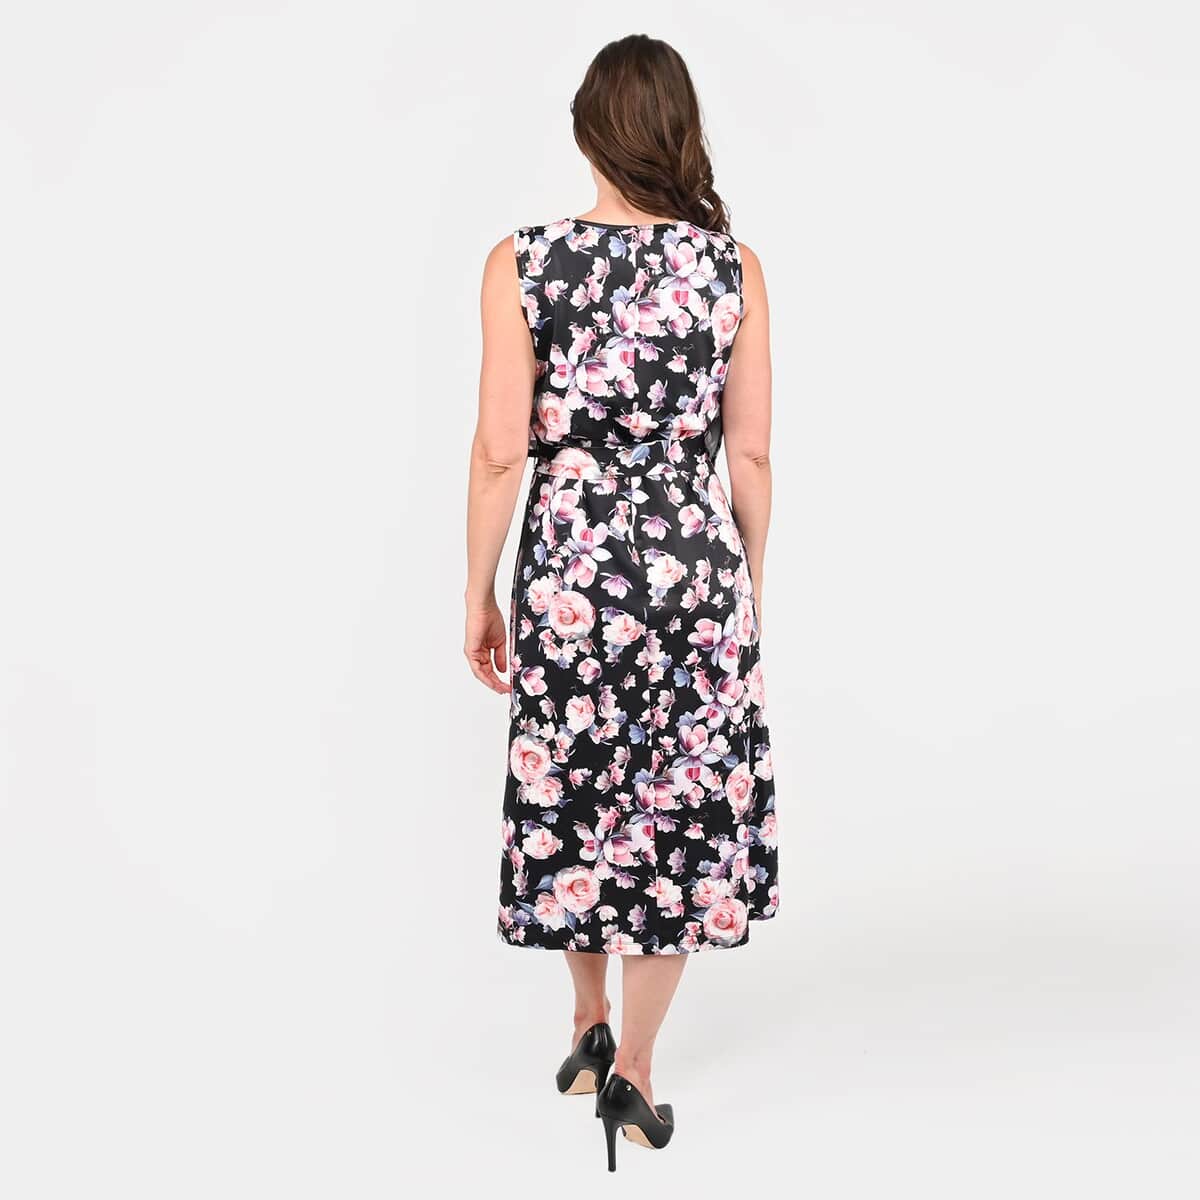 Tamsy Black Floral Sleeveless Dress with Waist Tie - L image number 1